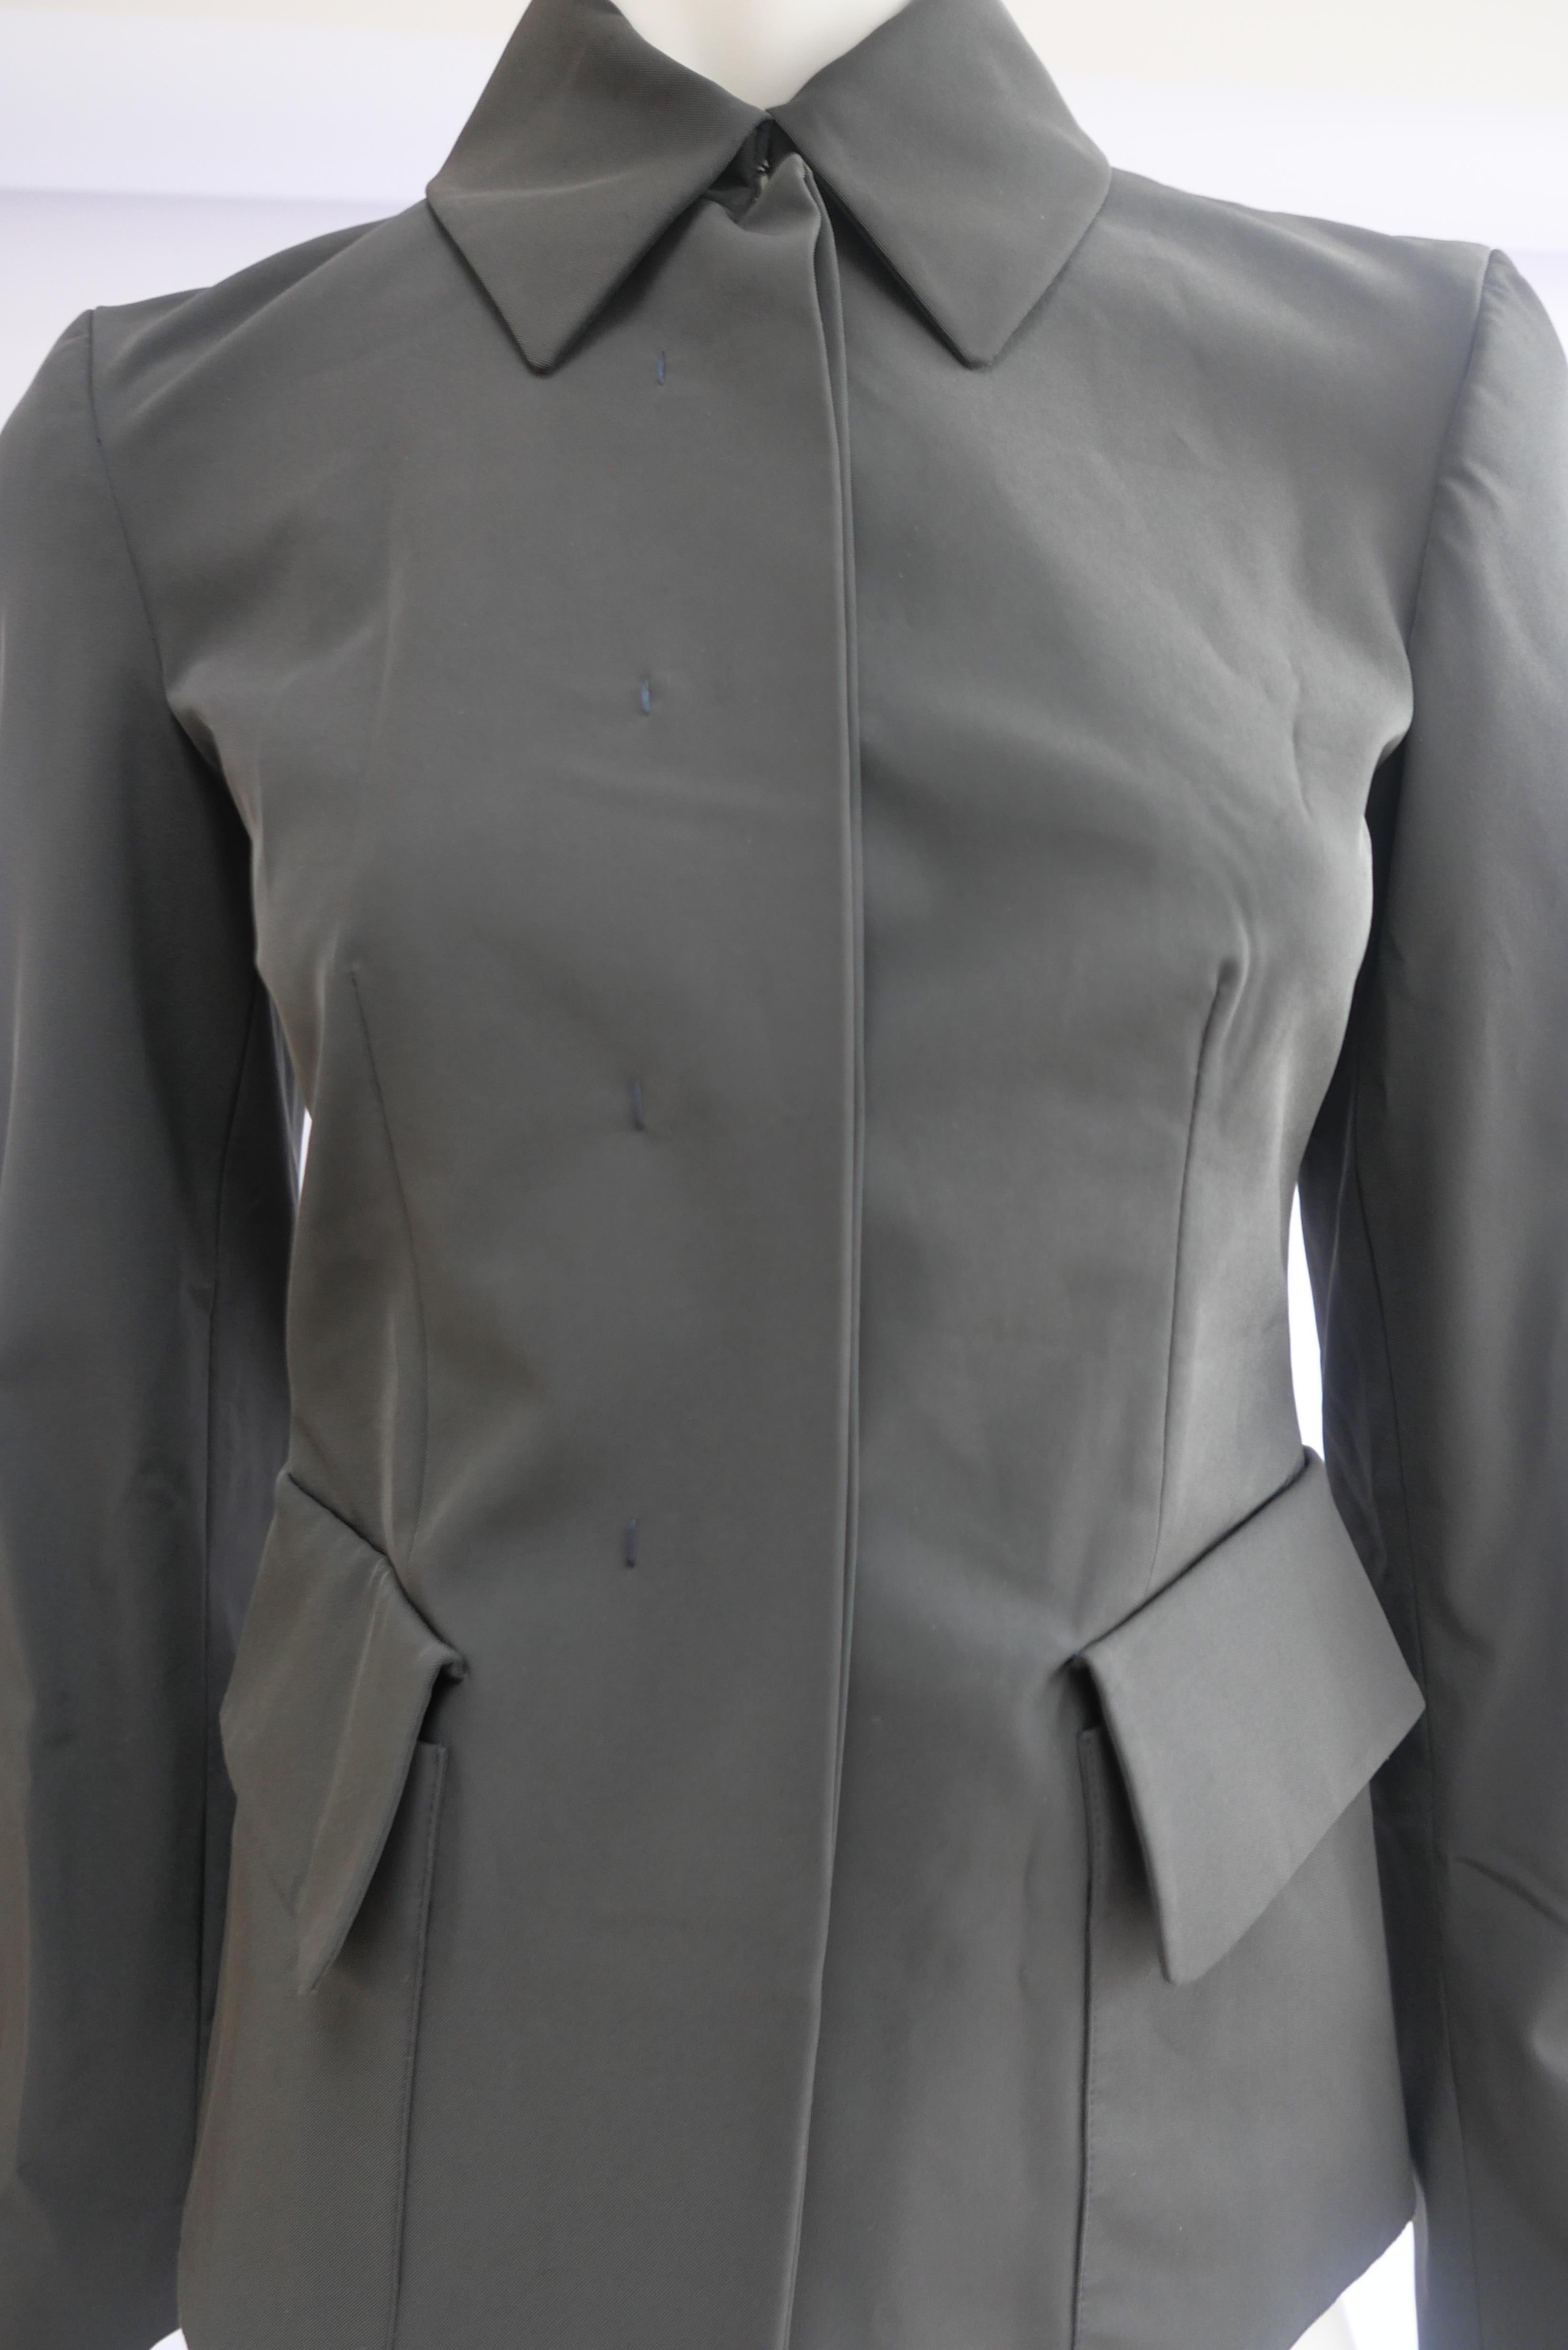 Prada Fitted Jacket 38 Dark Grey 
This piece is a fitted Prada jacket with concealed buttons. The design is modern and minimal in the classic Prada design style. 
Size:	38
Shoulder width: 38 cm 
Width: 40 cm 
Sleeve length: 60 cm 
Length: 56